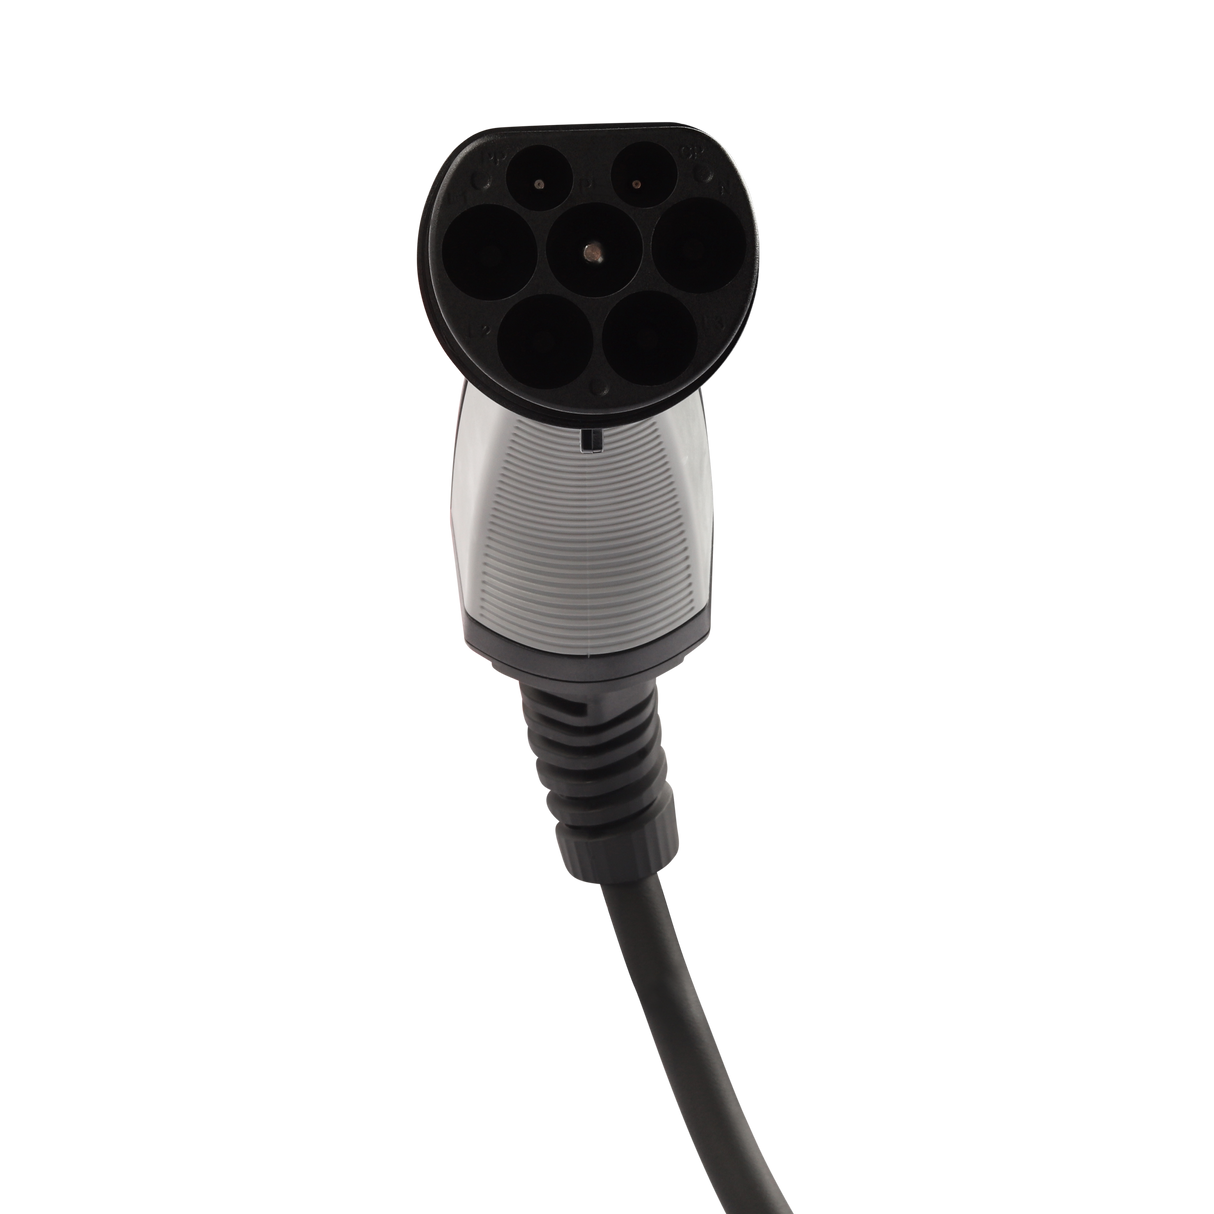 Charging cable Land Rover Defender 110 - Erock Pro Type 2 - 32A 1 phase (7.4 kW)